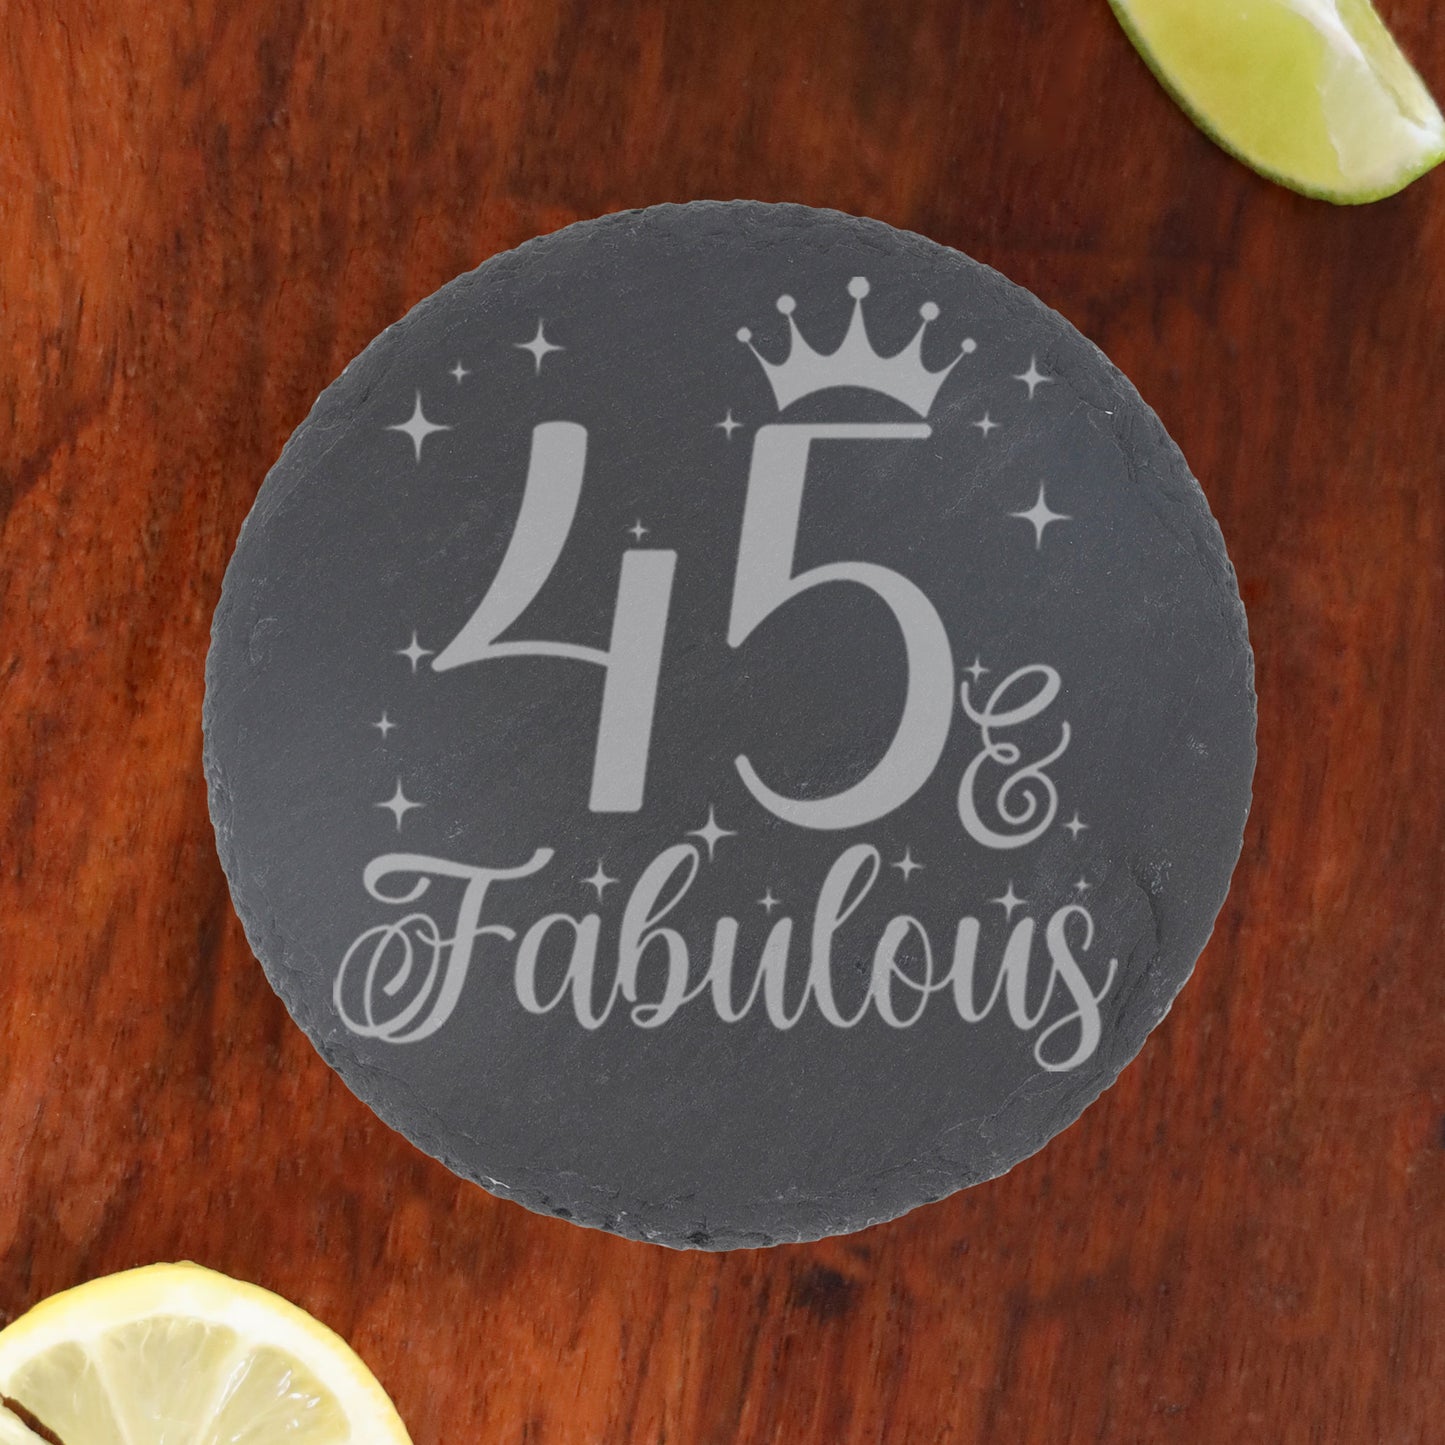 45 & Fabulous 45th Birthday Gift Engraved Wine Glass and/or Coaster Set  - Always Looking Good - Round Coaster Only  